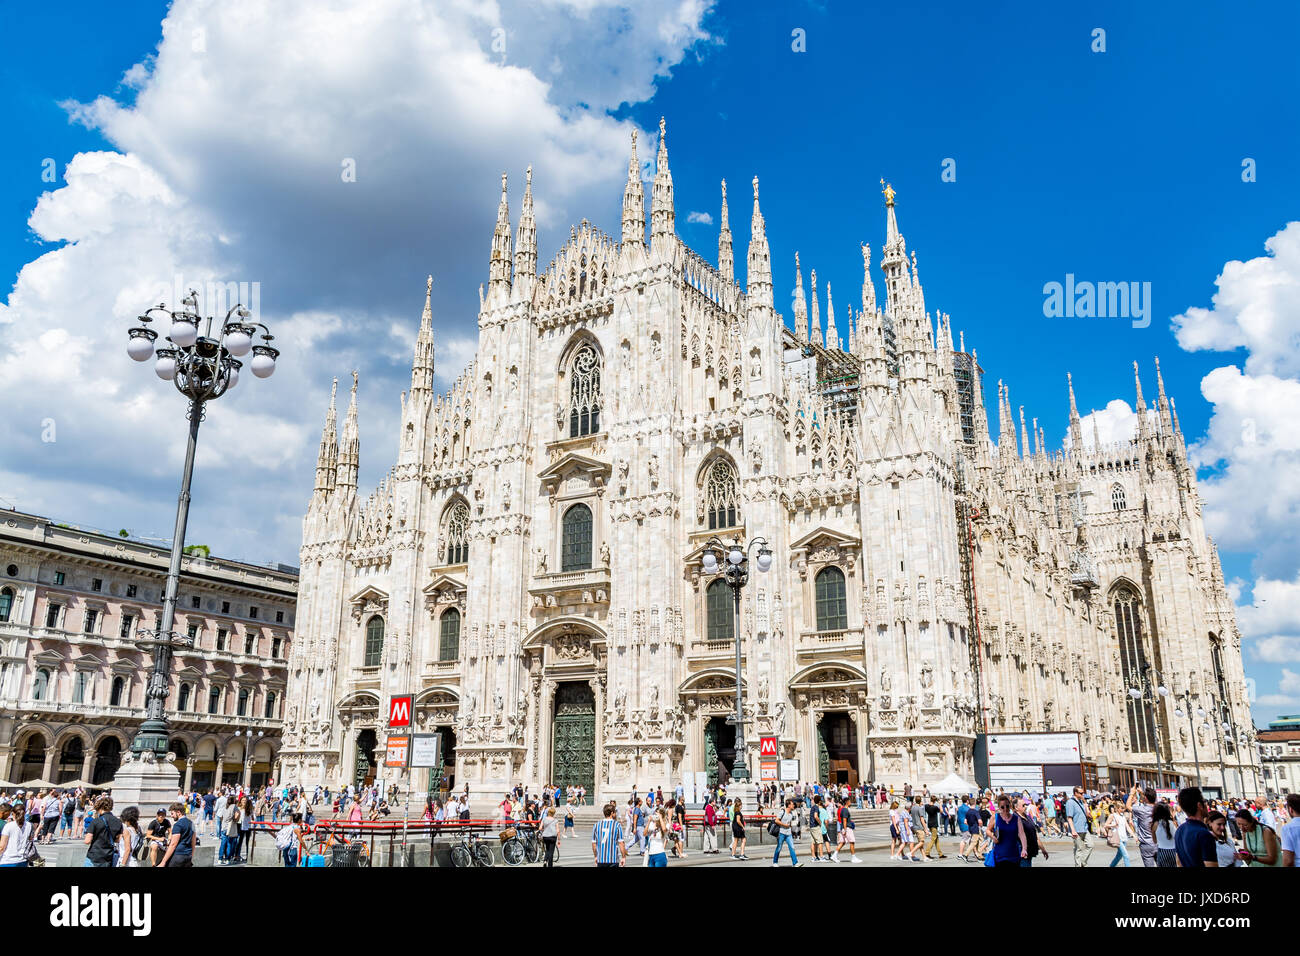 View of the Milan cathedral (Duomo di Milano) on a beautiful day, Milan, Italy Stock Photo